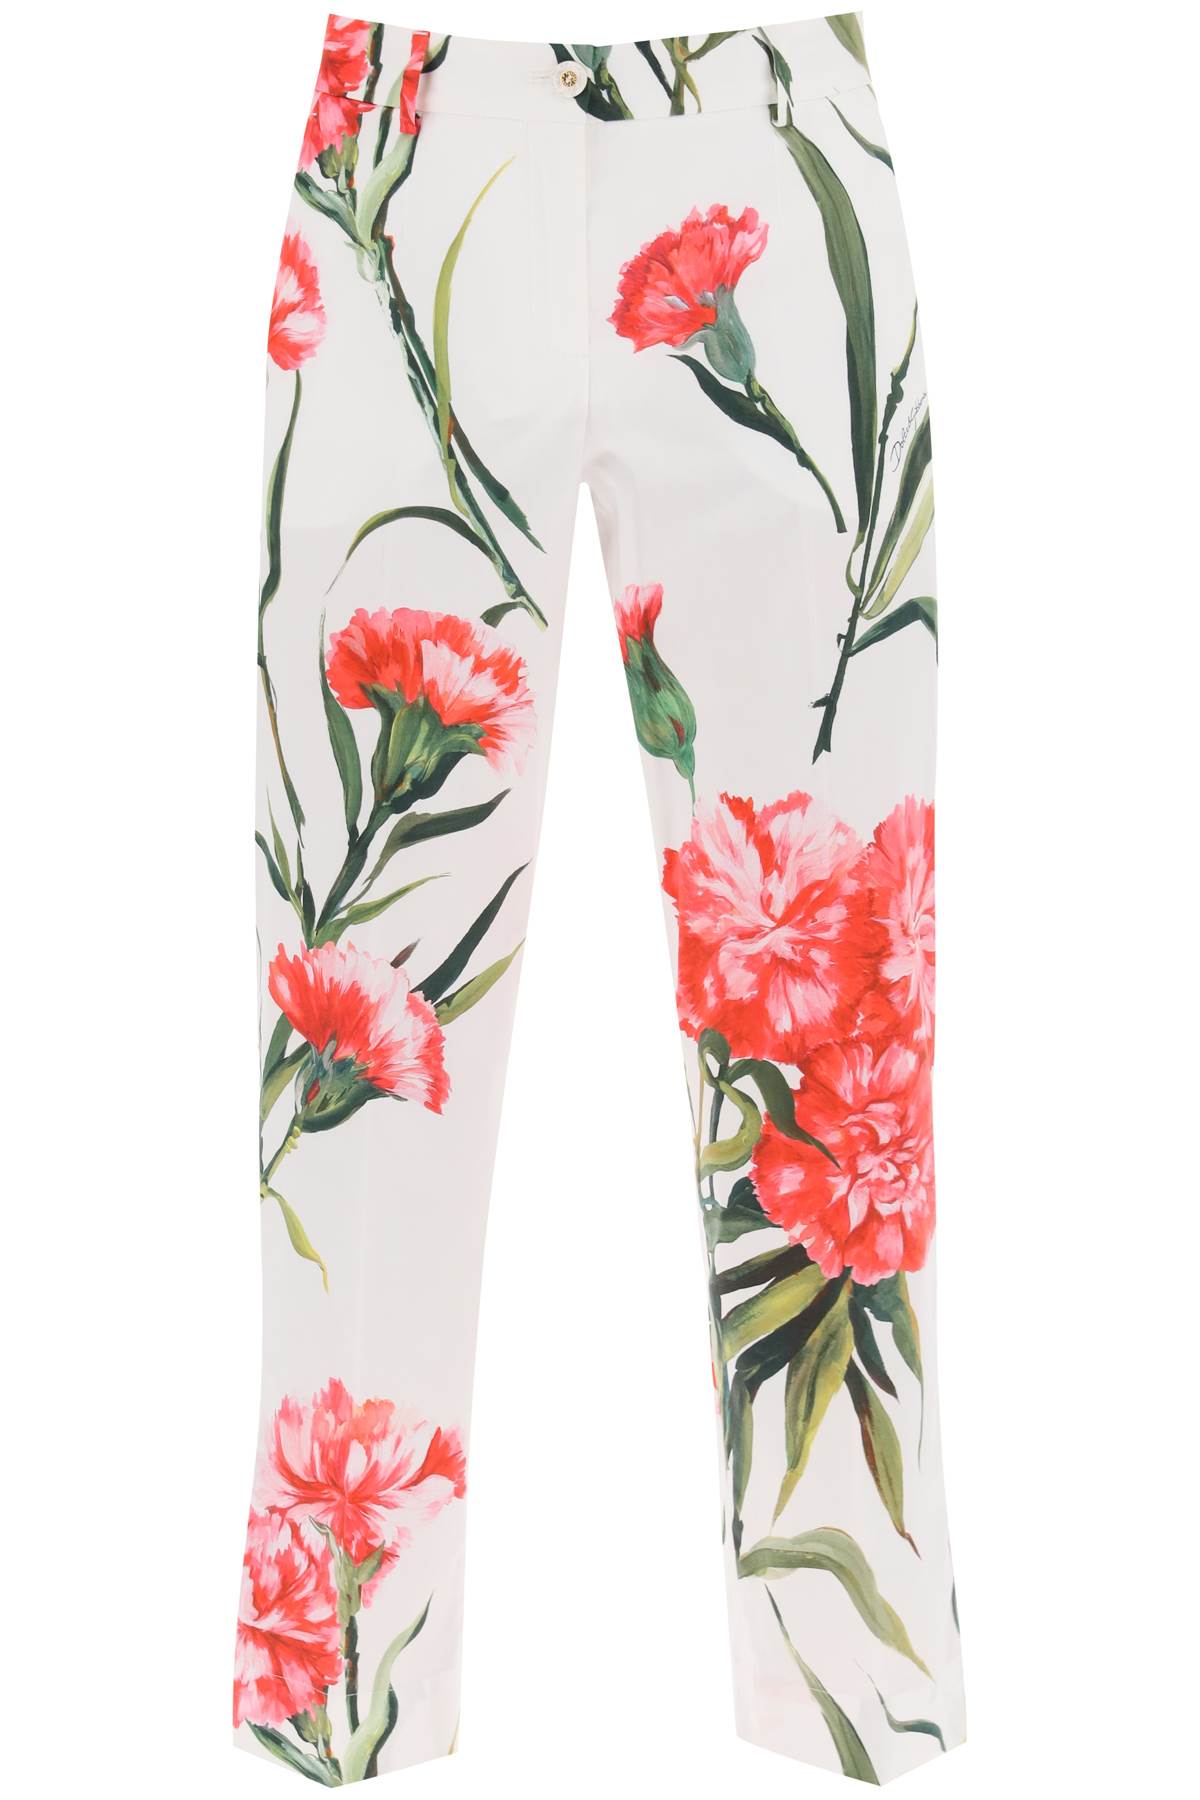 DOLCE & GABBANA CROPPED PANTS WITH CARNATION MOTIF